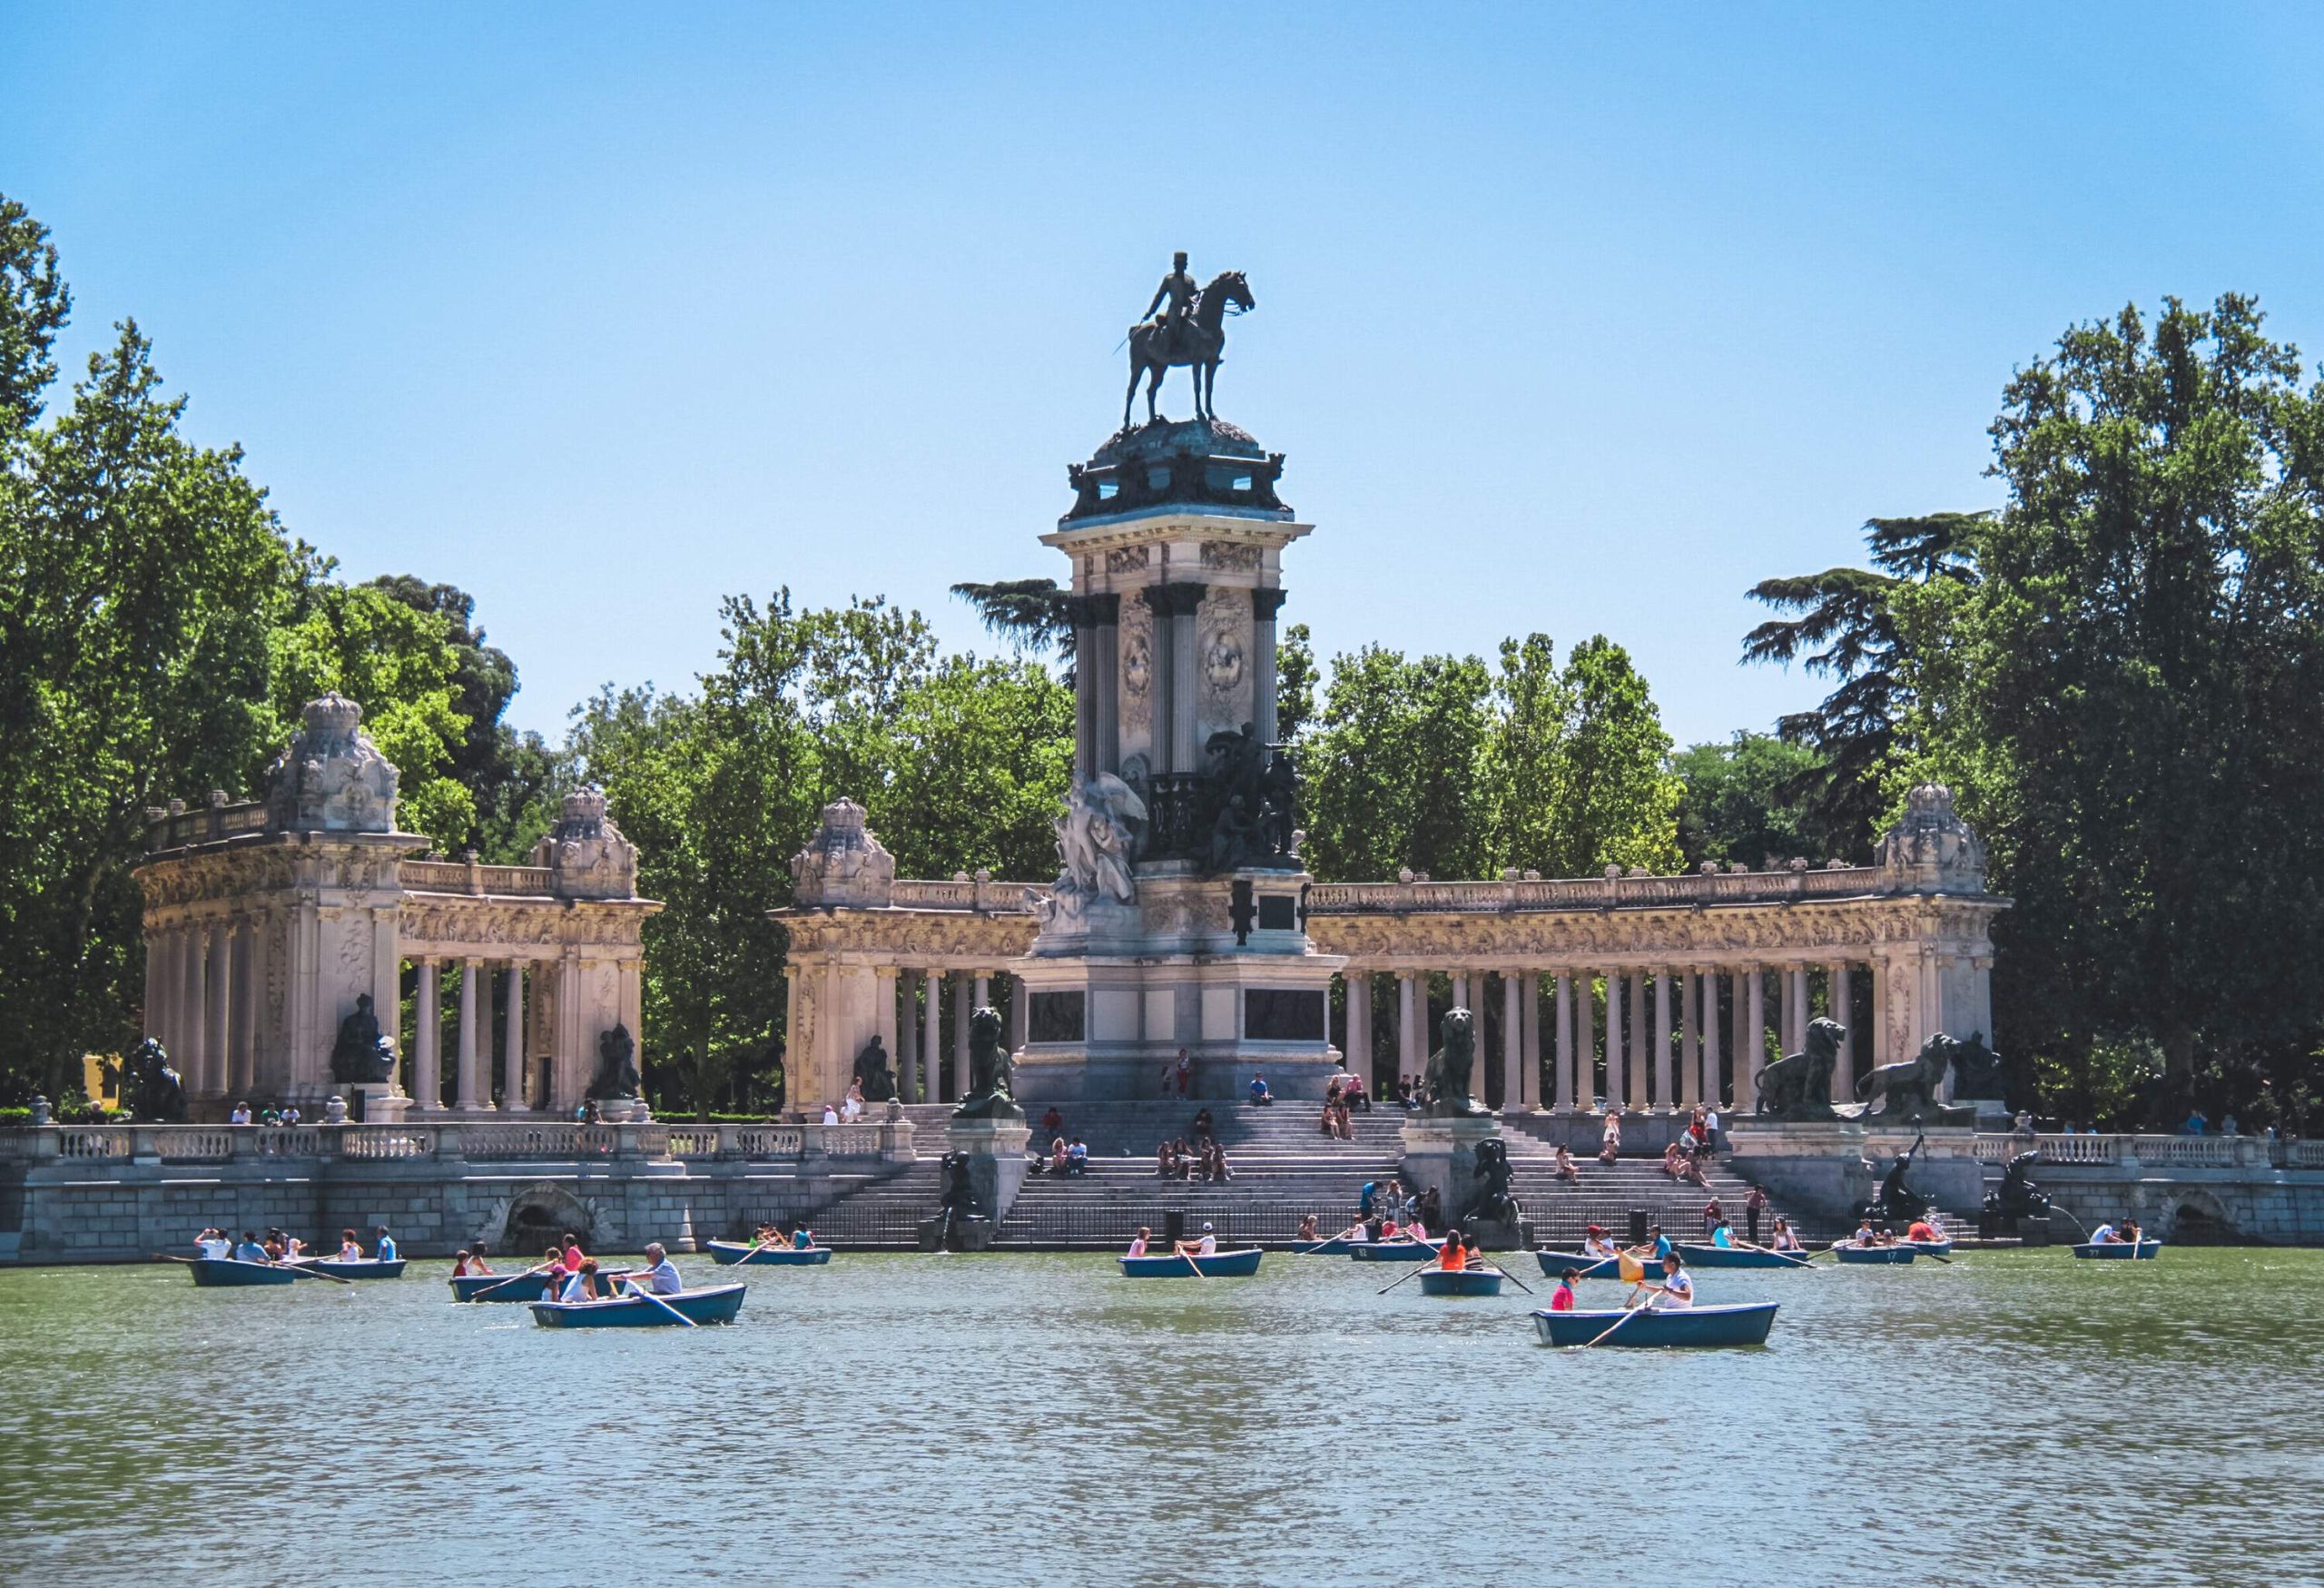 People on small blue boats paddle on the artificial lake in front of the monument of the equestrian sculpture of a king.